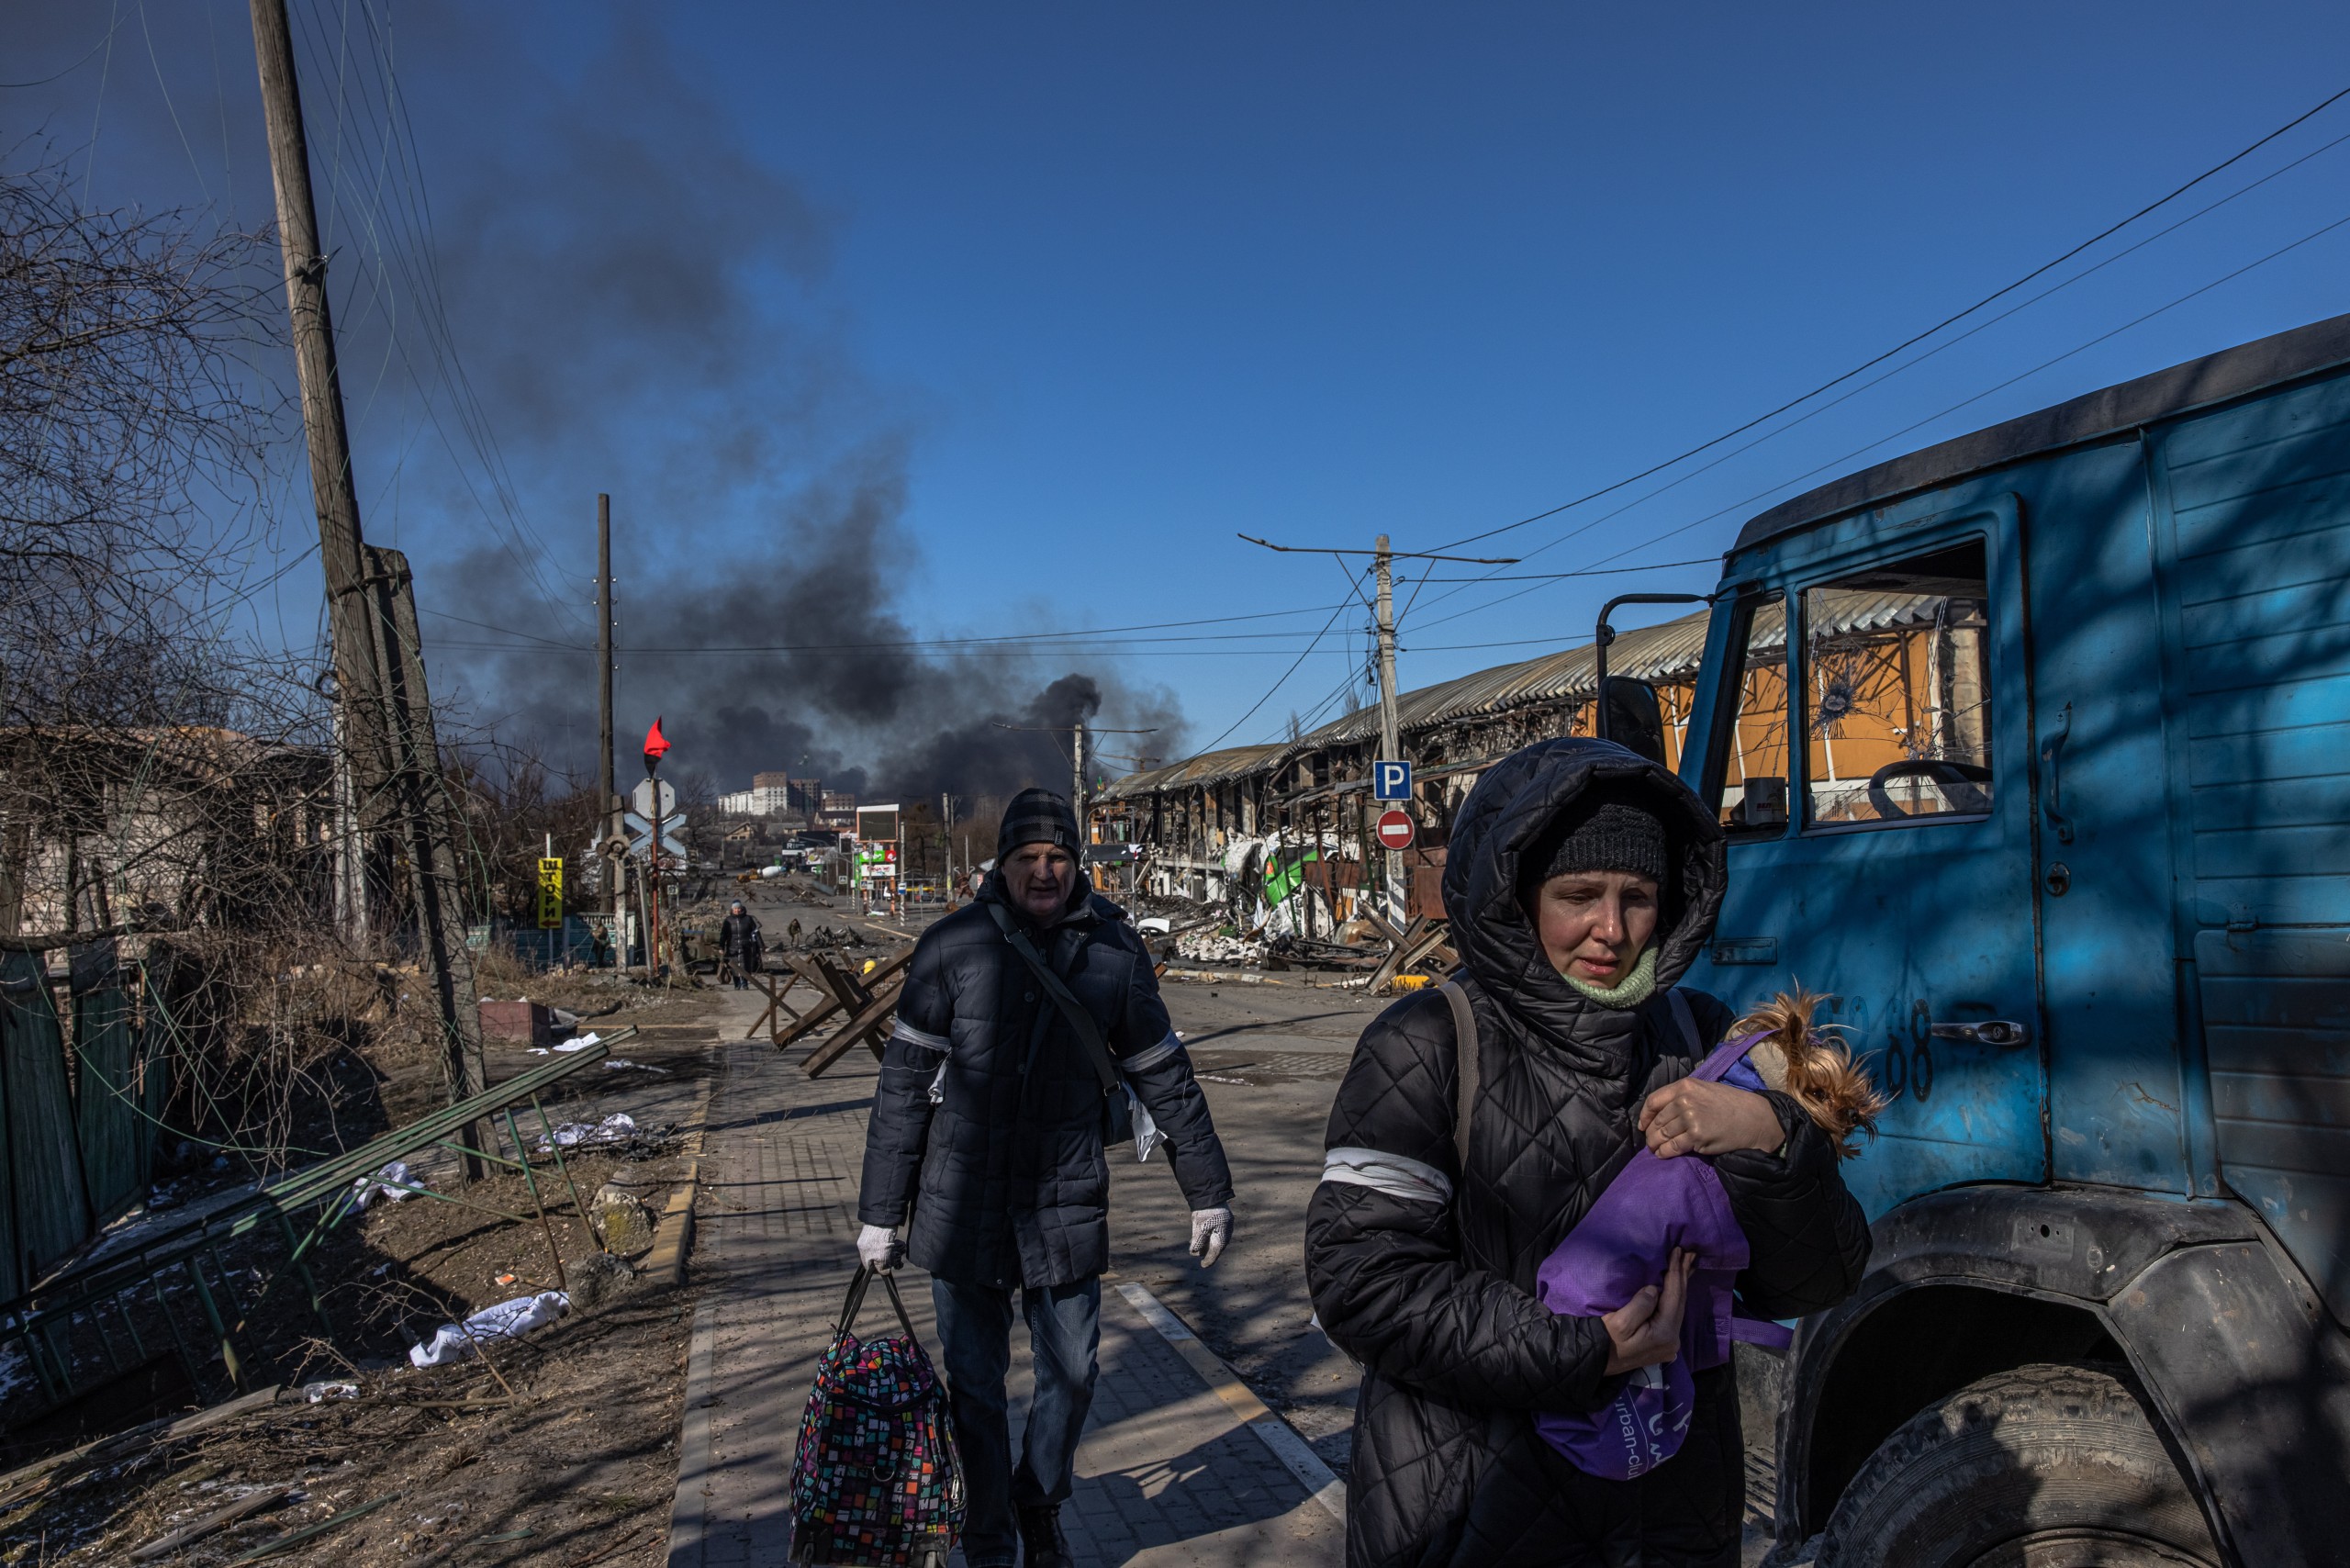 epa09815740 Residents coming from Bucha town, which is currently controlled by the Russian military, walk with luggage past the Ukrainian checkpoint at the frontline in Irpin town, Kyiv (Kiev) region, Ukraine, 10 March 2022. Thousands of residents are feeling Irpin and Bucha, as well as other settlements near Kyiv which were the most affected by the Russian army invasion.  EPA/ROMAN PILIPEY